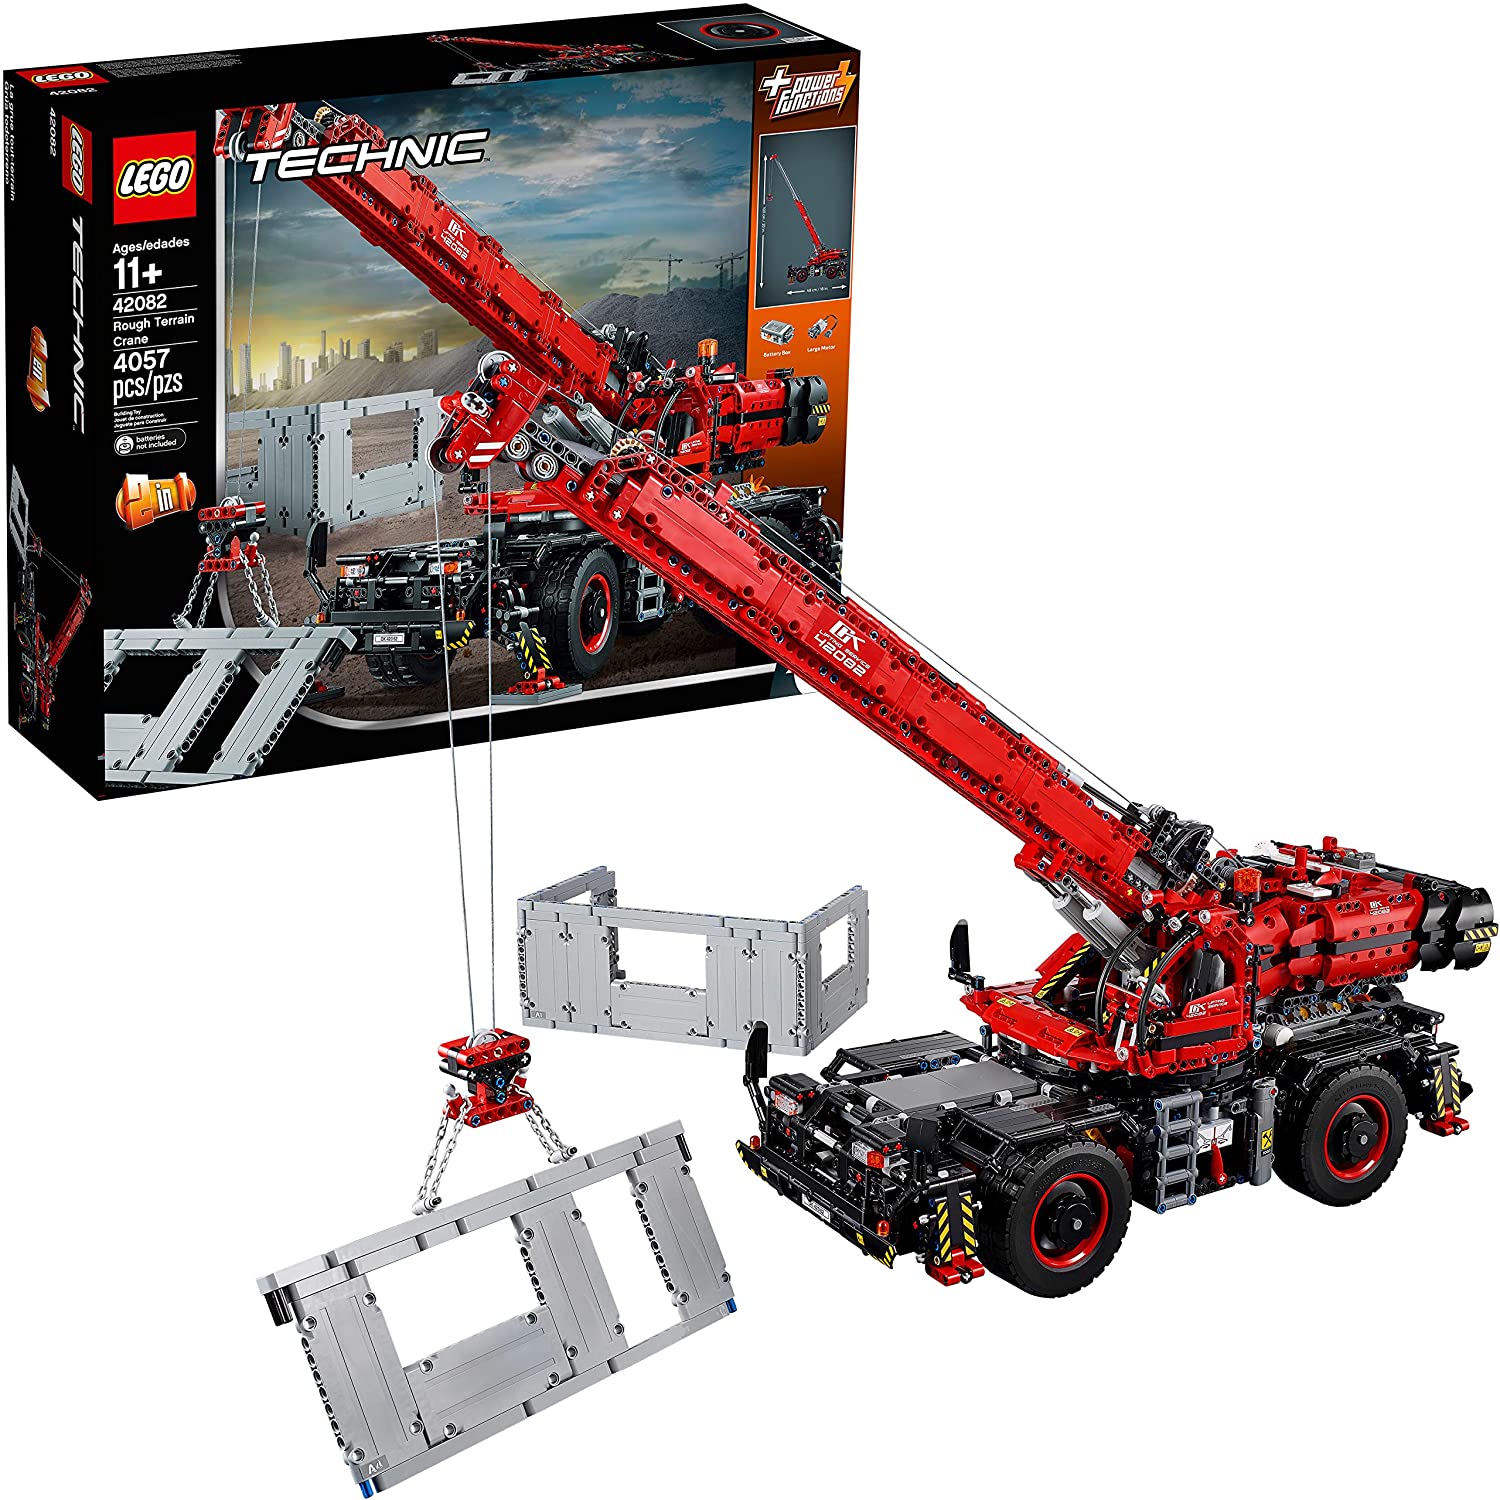 7 Best LEGO Crane Sets 2022 - Buying Guide & Reviews 1